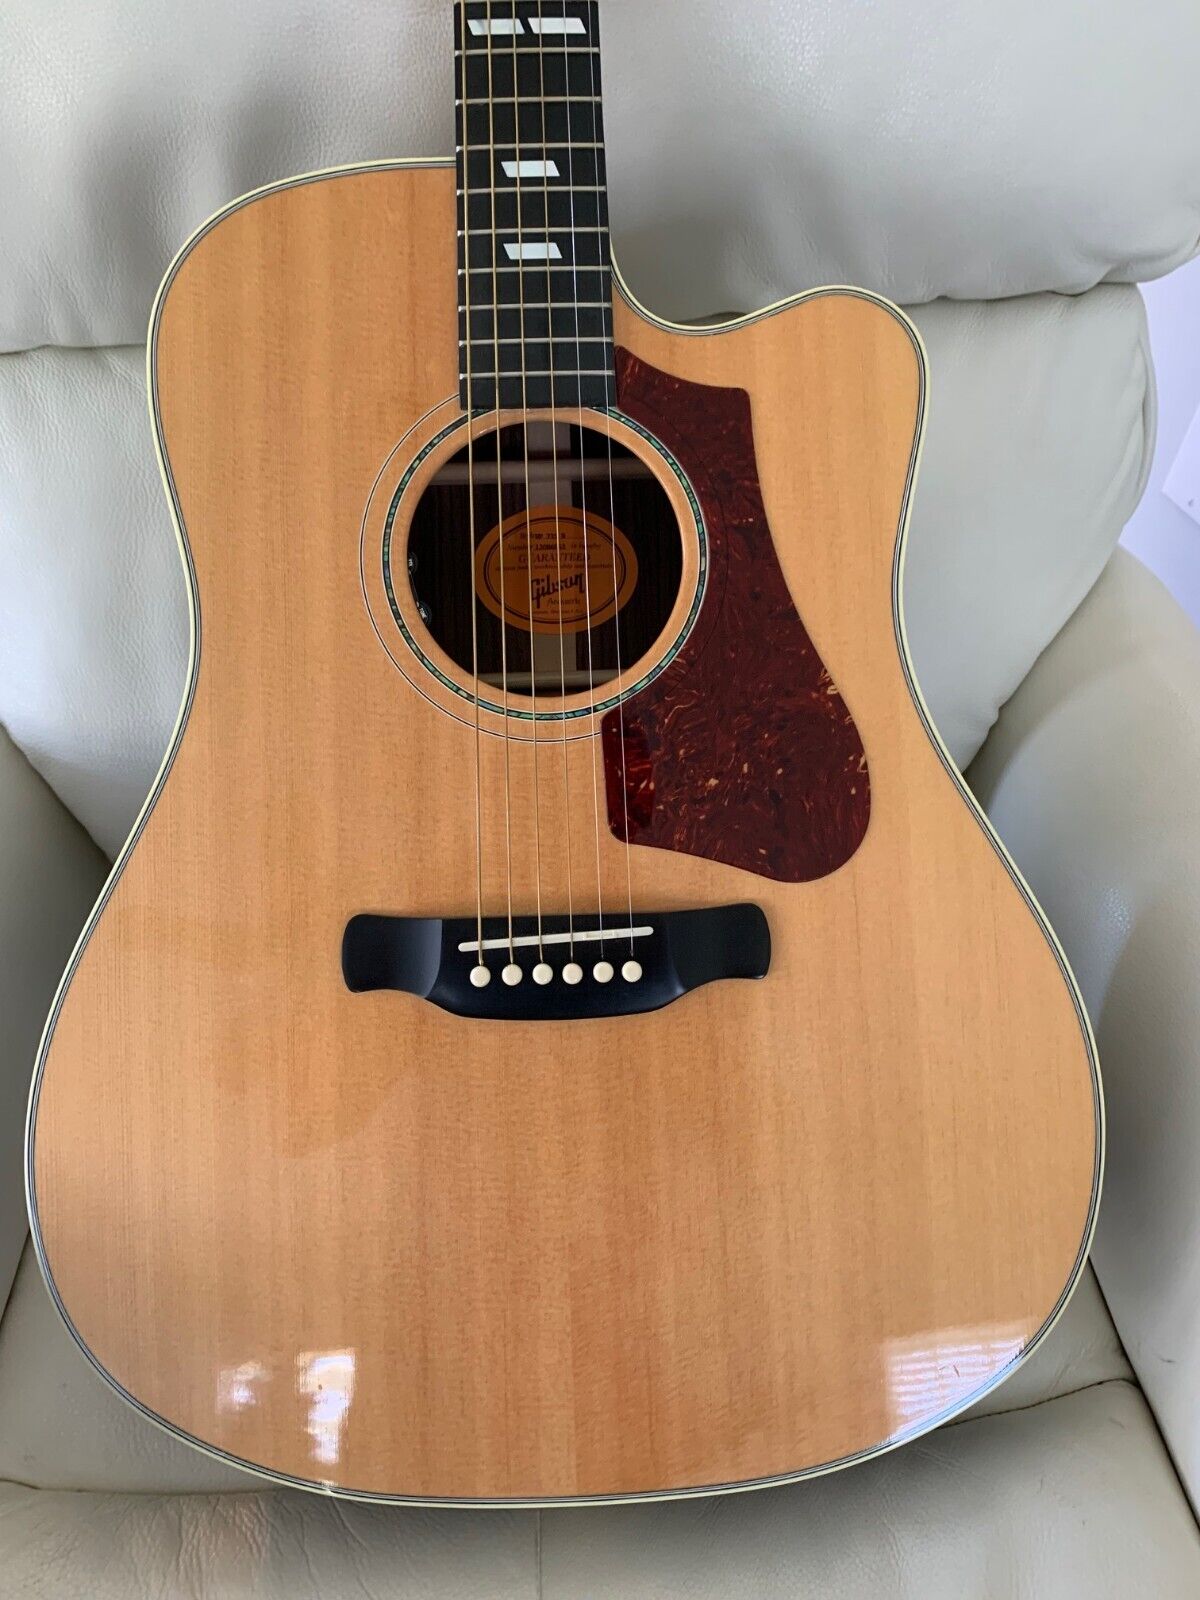 Gibson Acoustic Guitar HP 735R 2017 Mint Condition